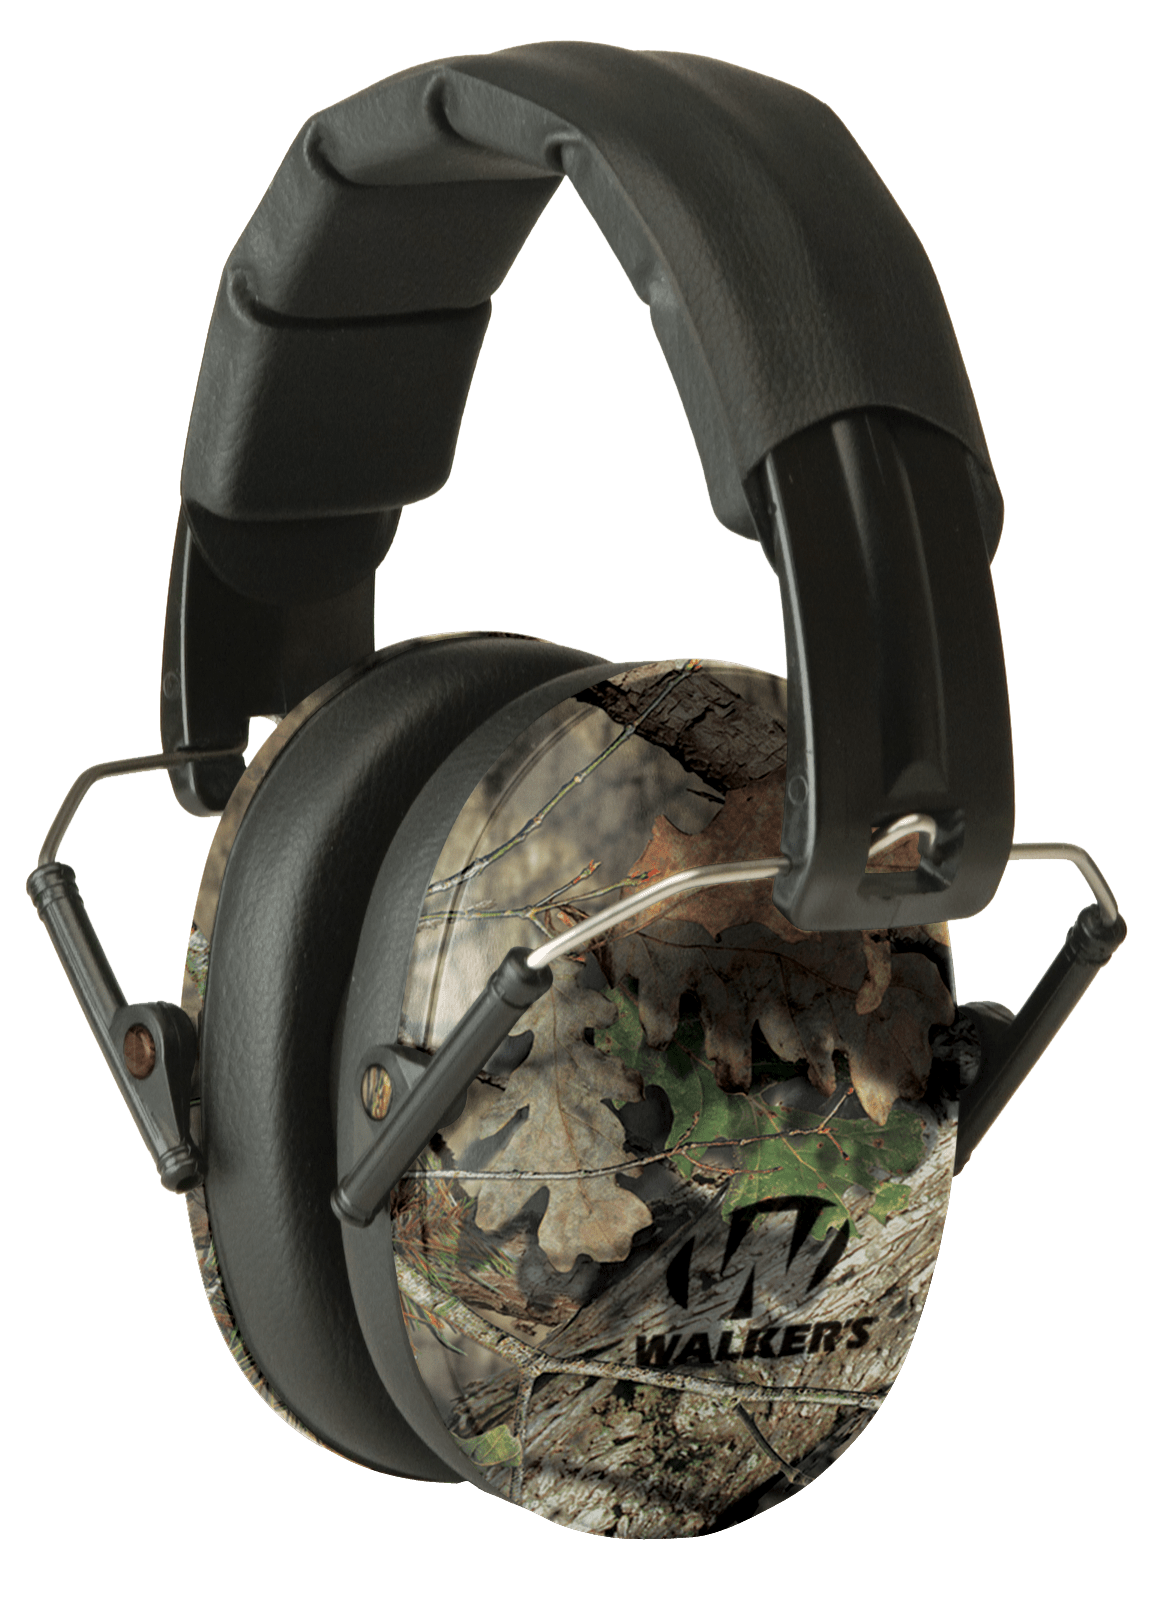 Walkers Game Ear Walkers Game Ear Pro, Wlkr Gwp-fpm1-cmo   Prolow Fld Muff Camo Shooting